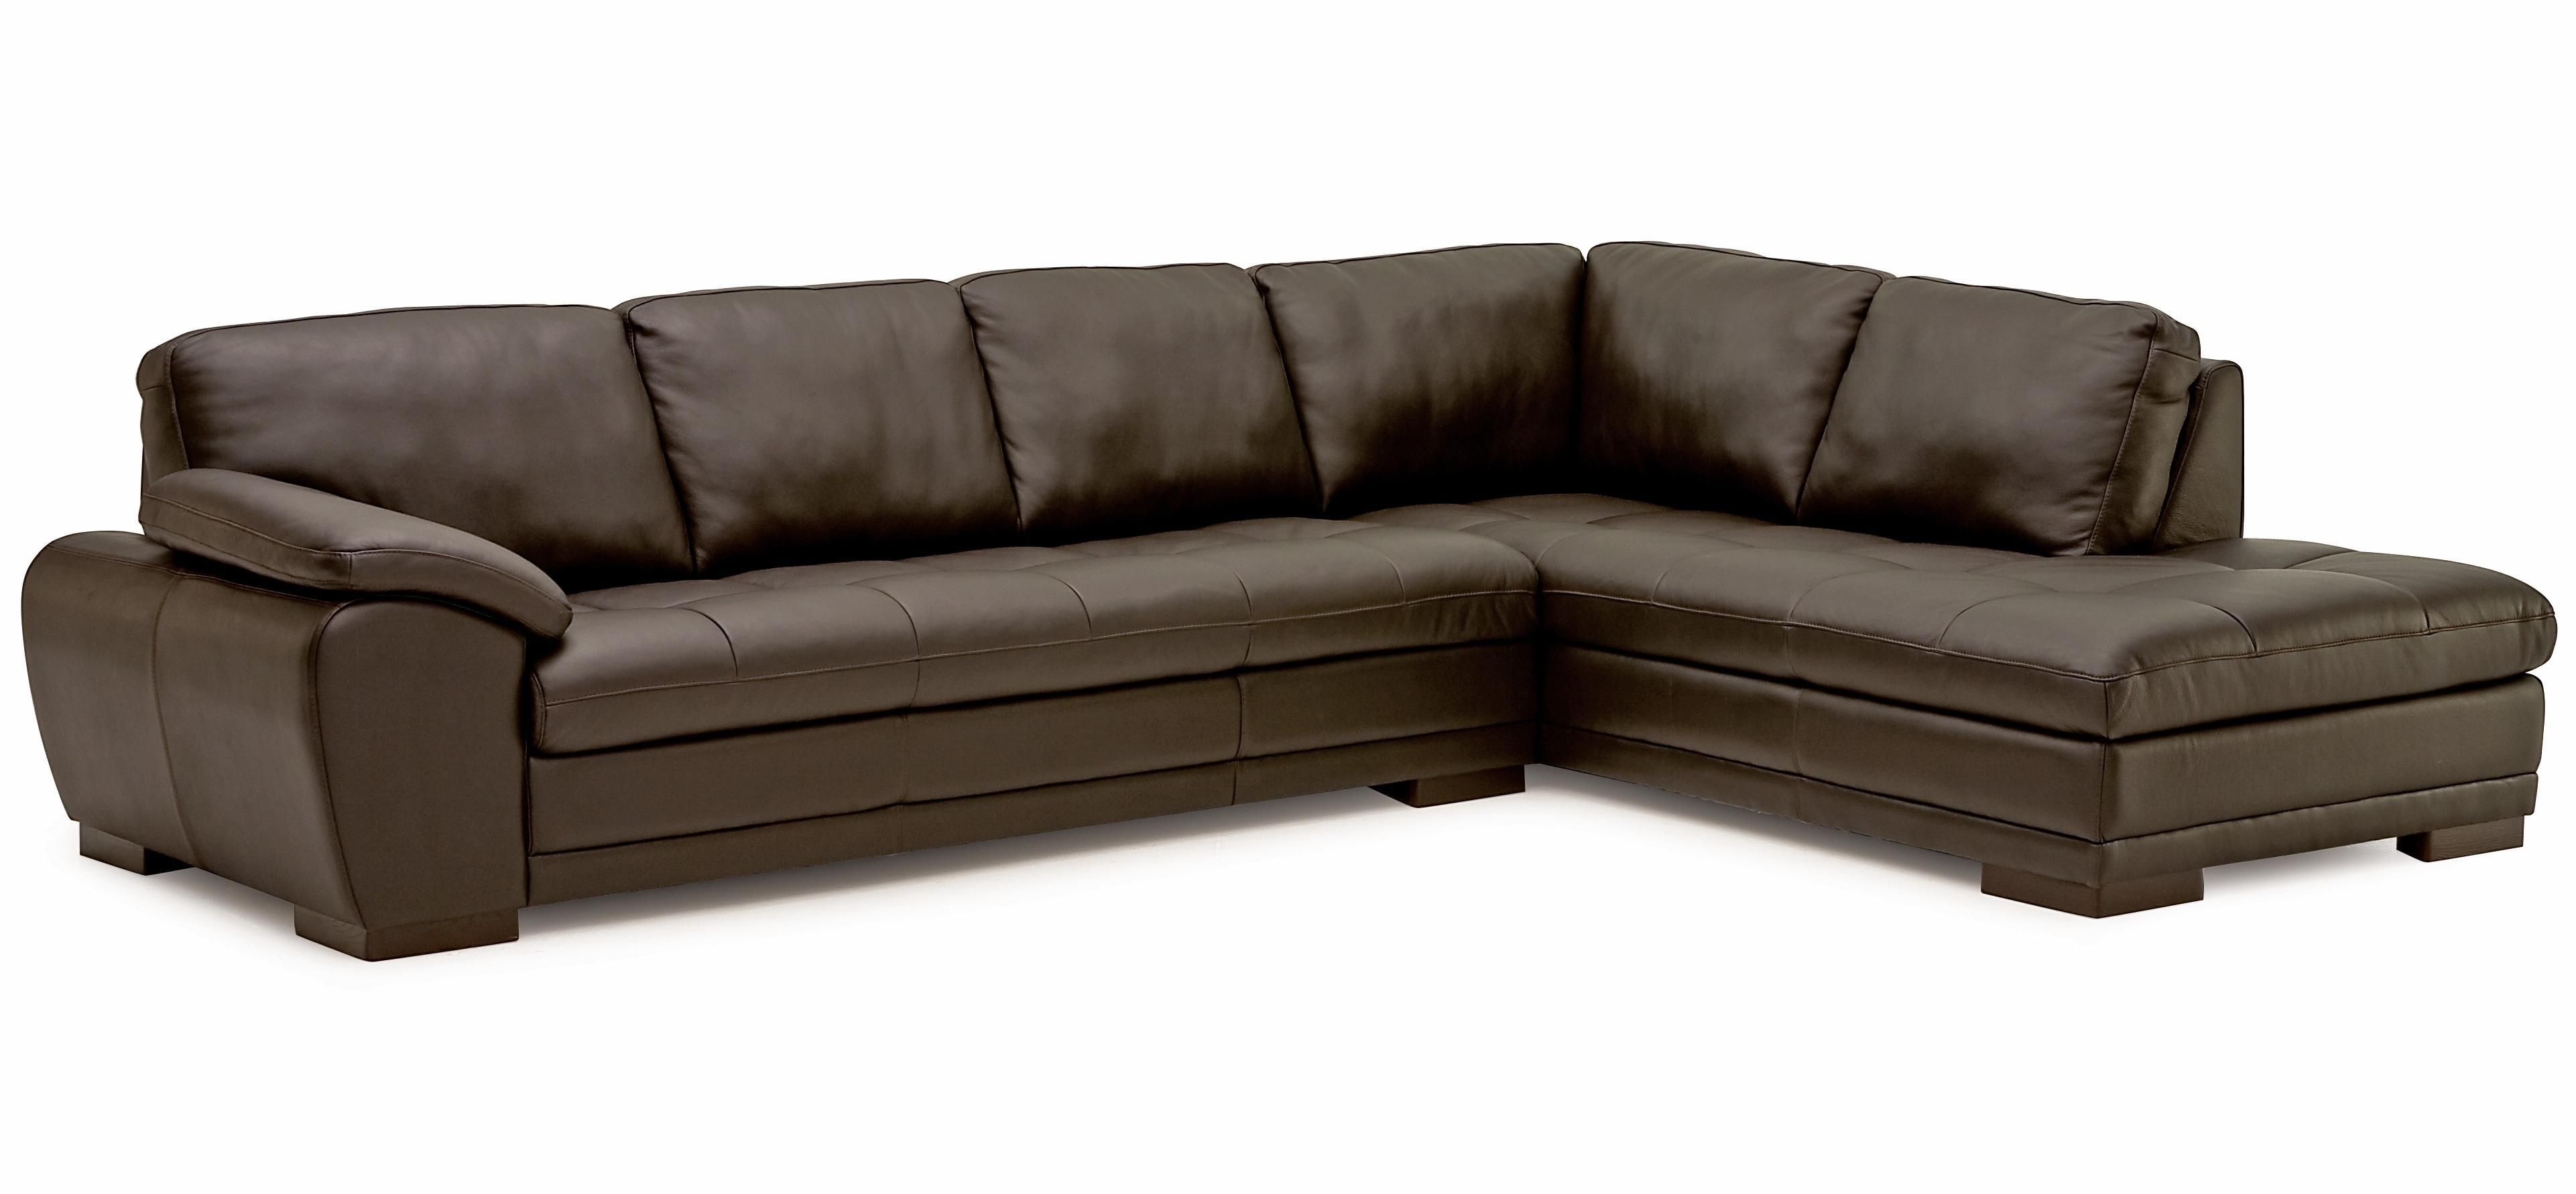 Fascinating Palliser Miami Contemporary Piece Sectional Sofa With Throughout Miami Sectional Sofas (View 3 of 10)